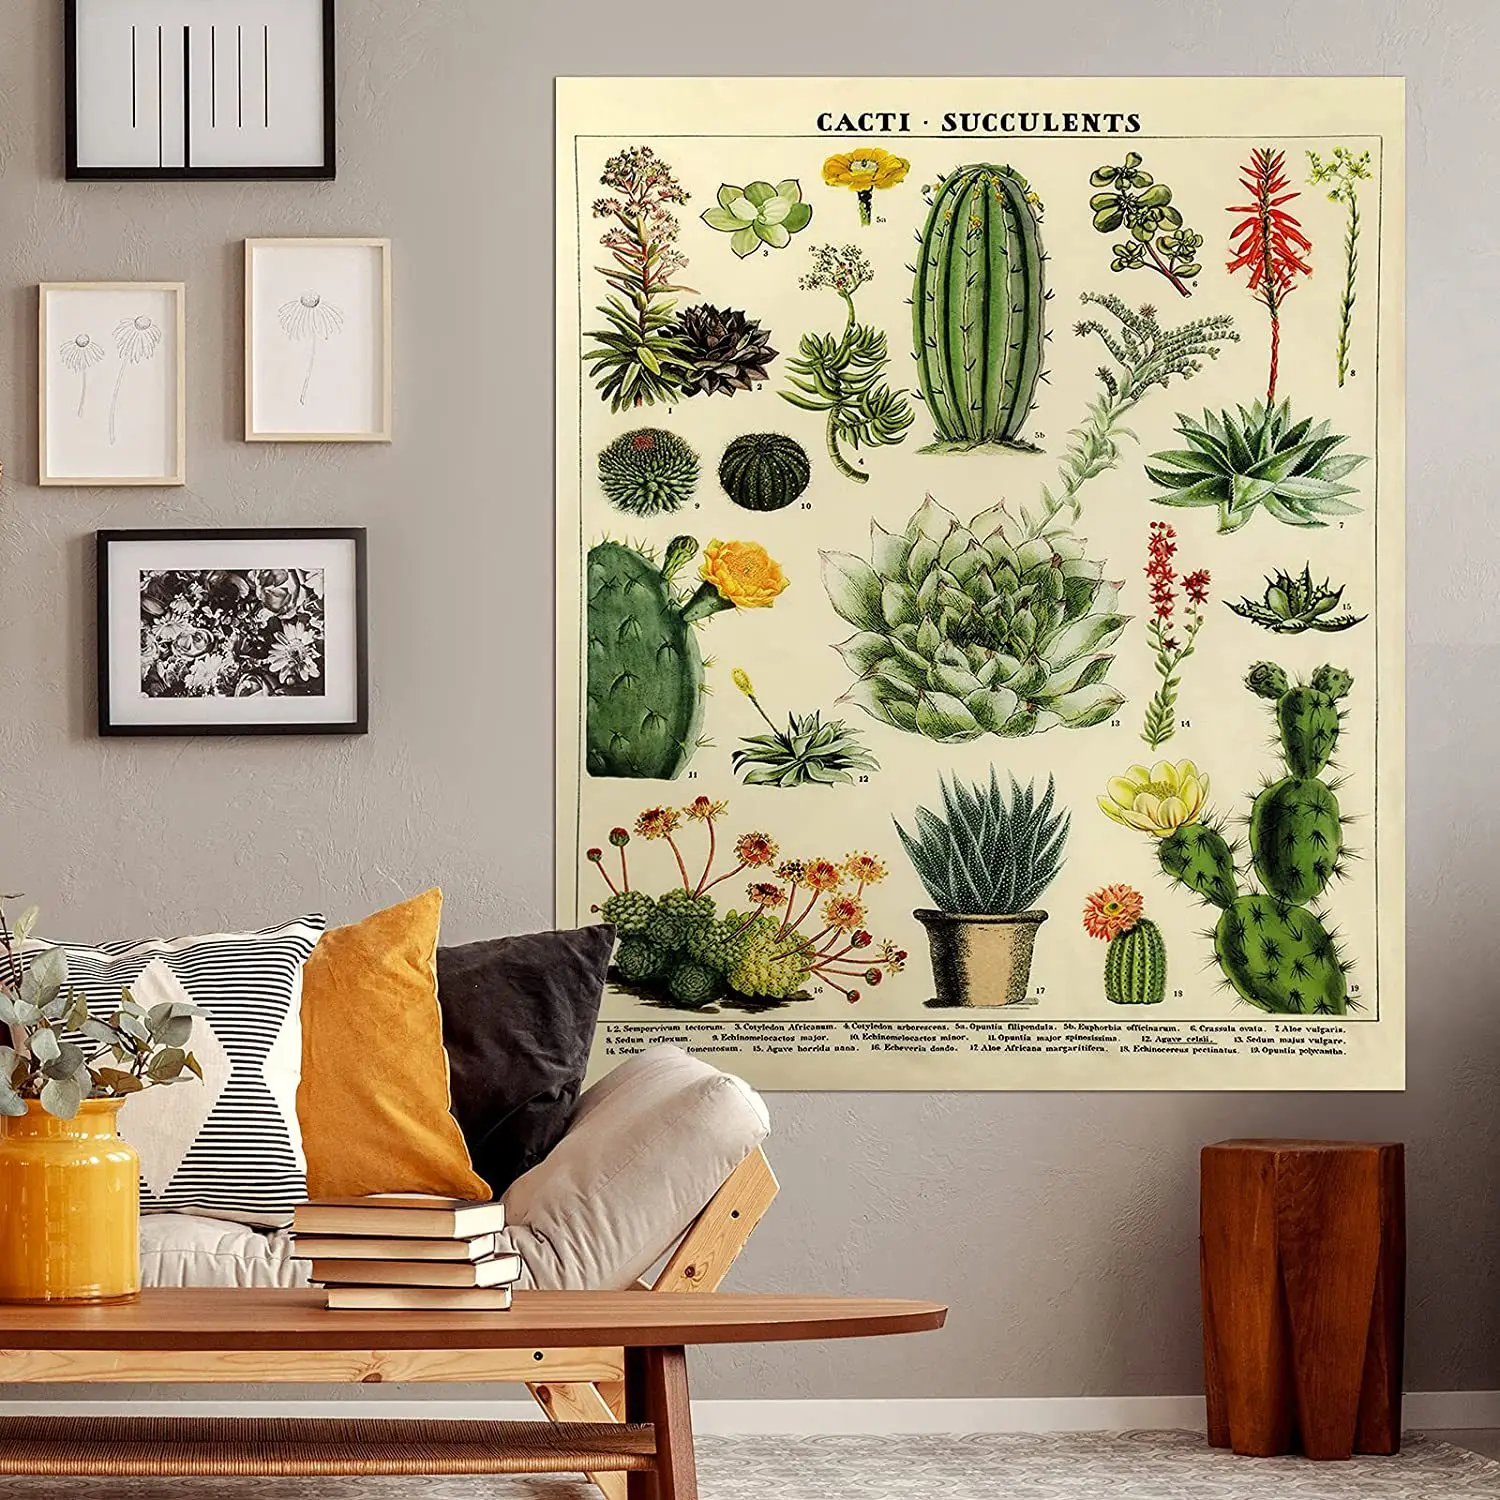 

Cactus Botanical Tapestry Wall Hanging Retro cacti succulents Mushroom Chart Hippie Bohemian Psychedelic Witchcraft Home Decor